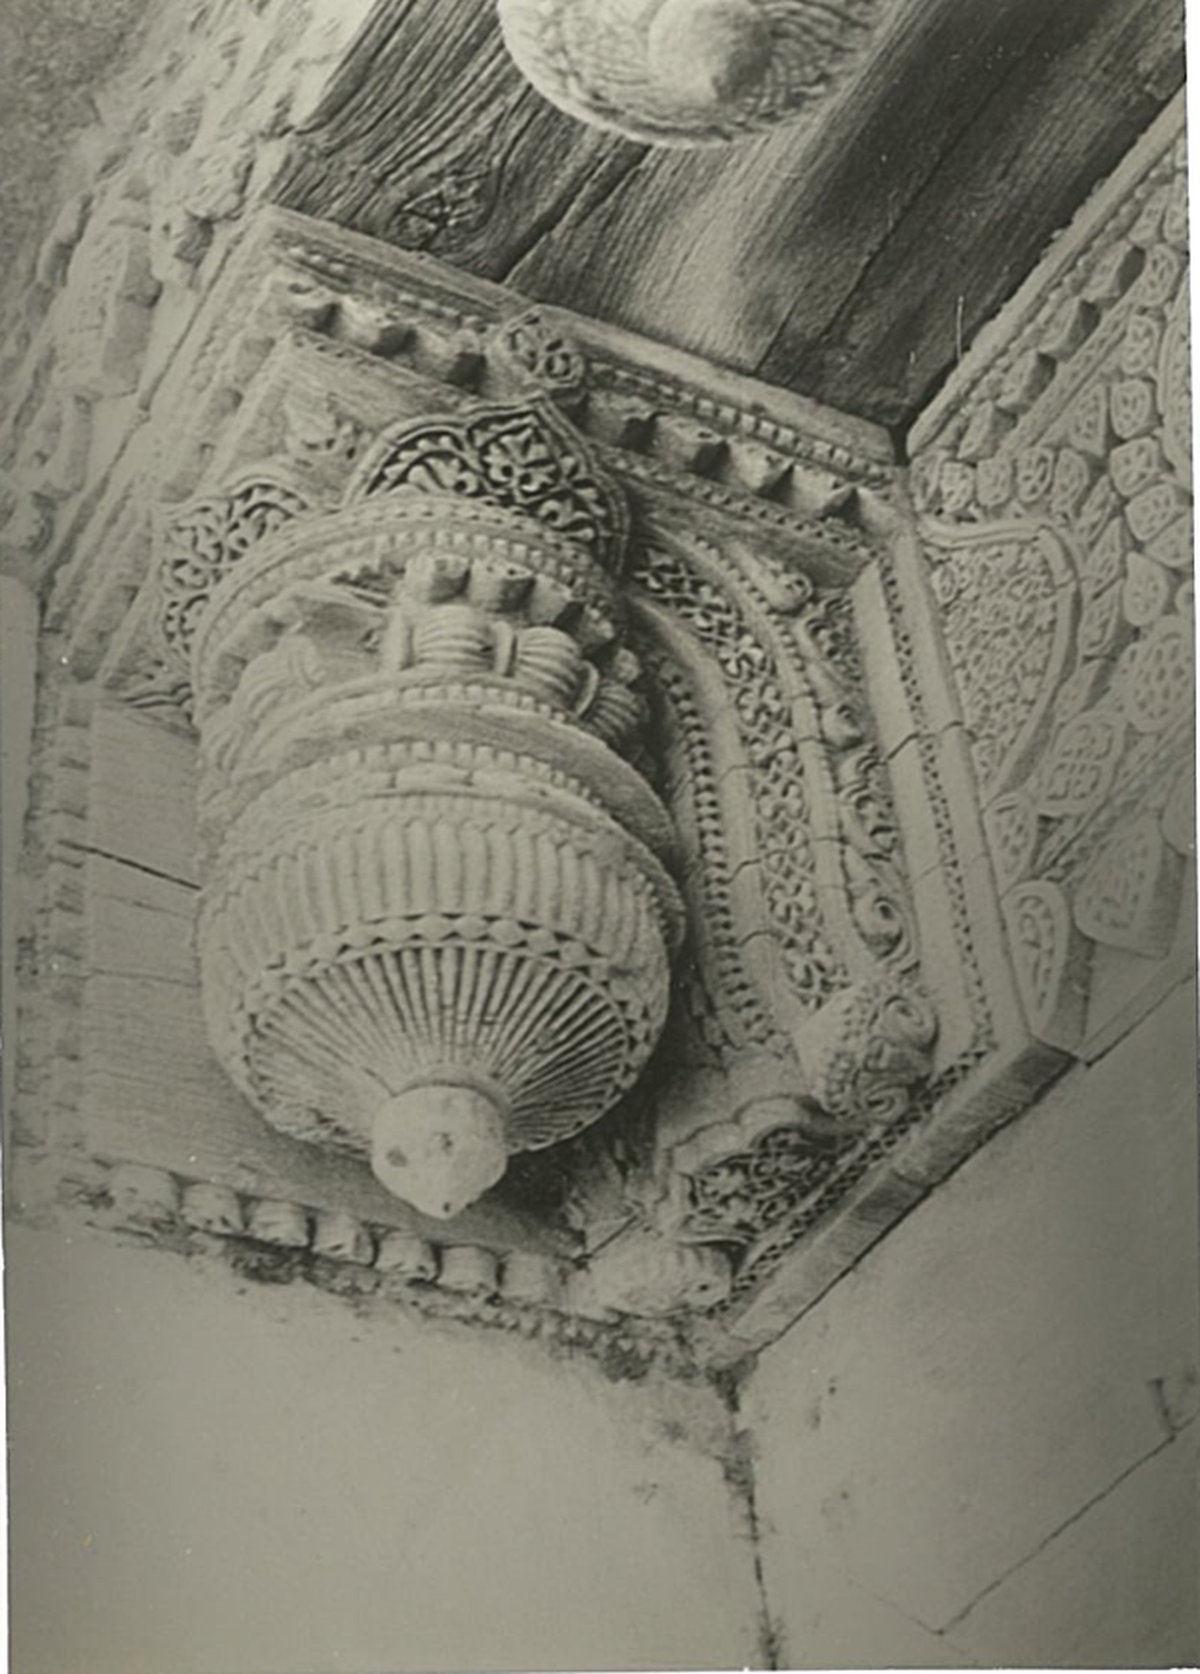 Black and white archival images of Paithan’s wood carvings were part of the exhibition because the designs have been replicated in the textiles